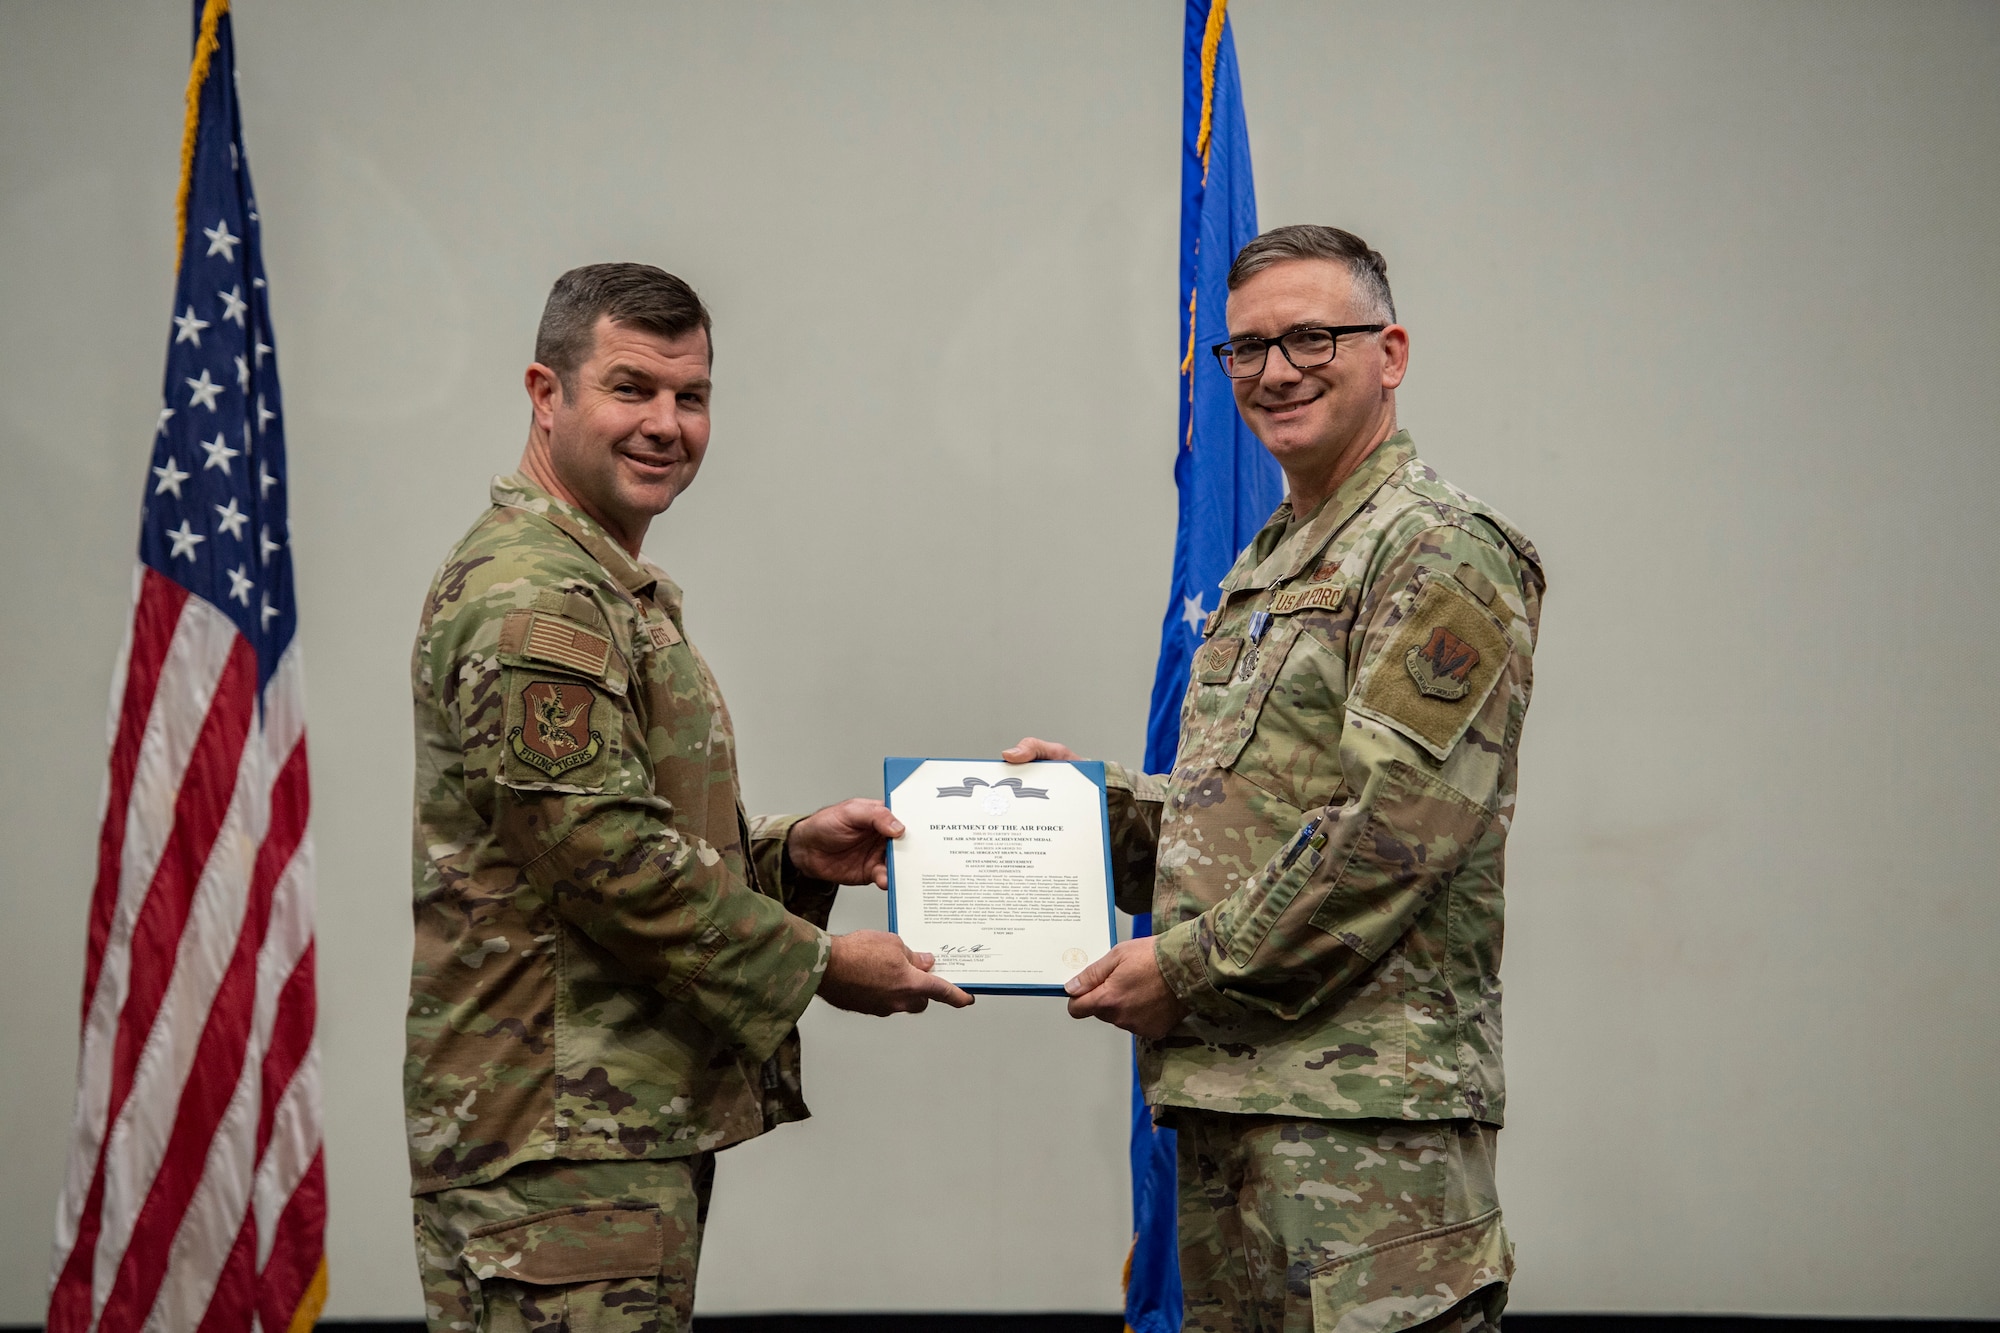 Base commander poses for photo with award recipient